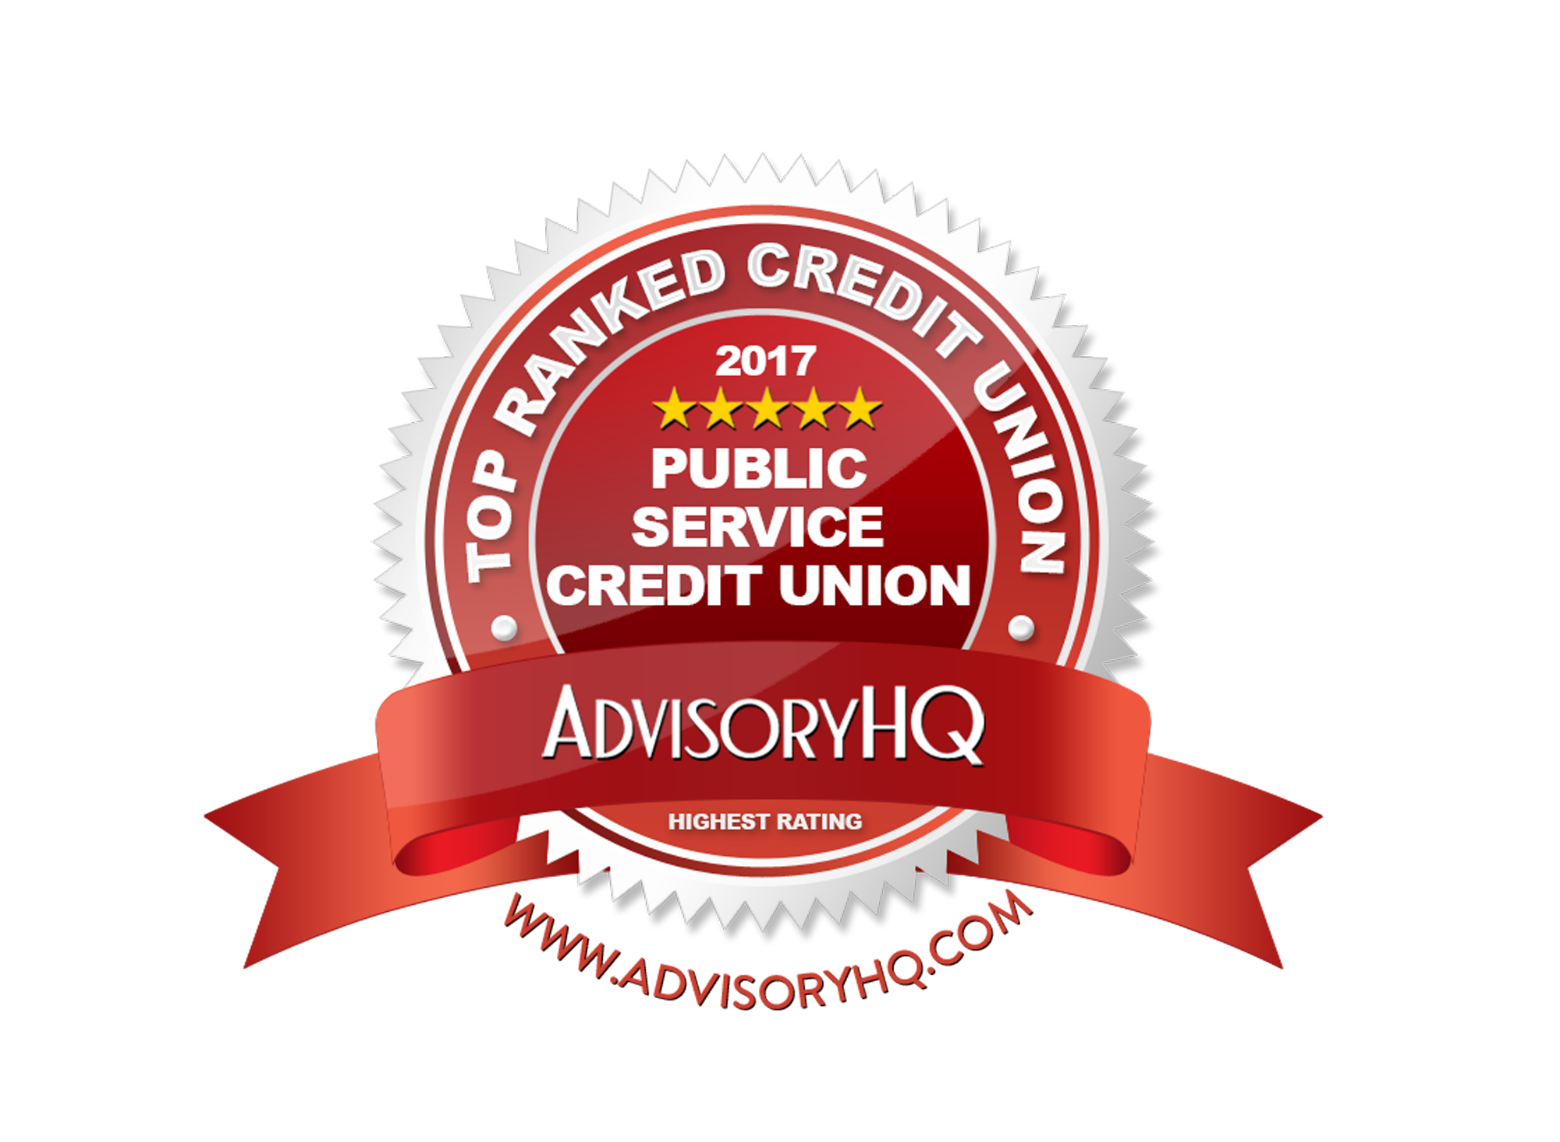 TOP RANKED CREDIT UNION 2017